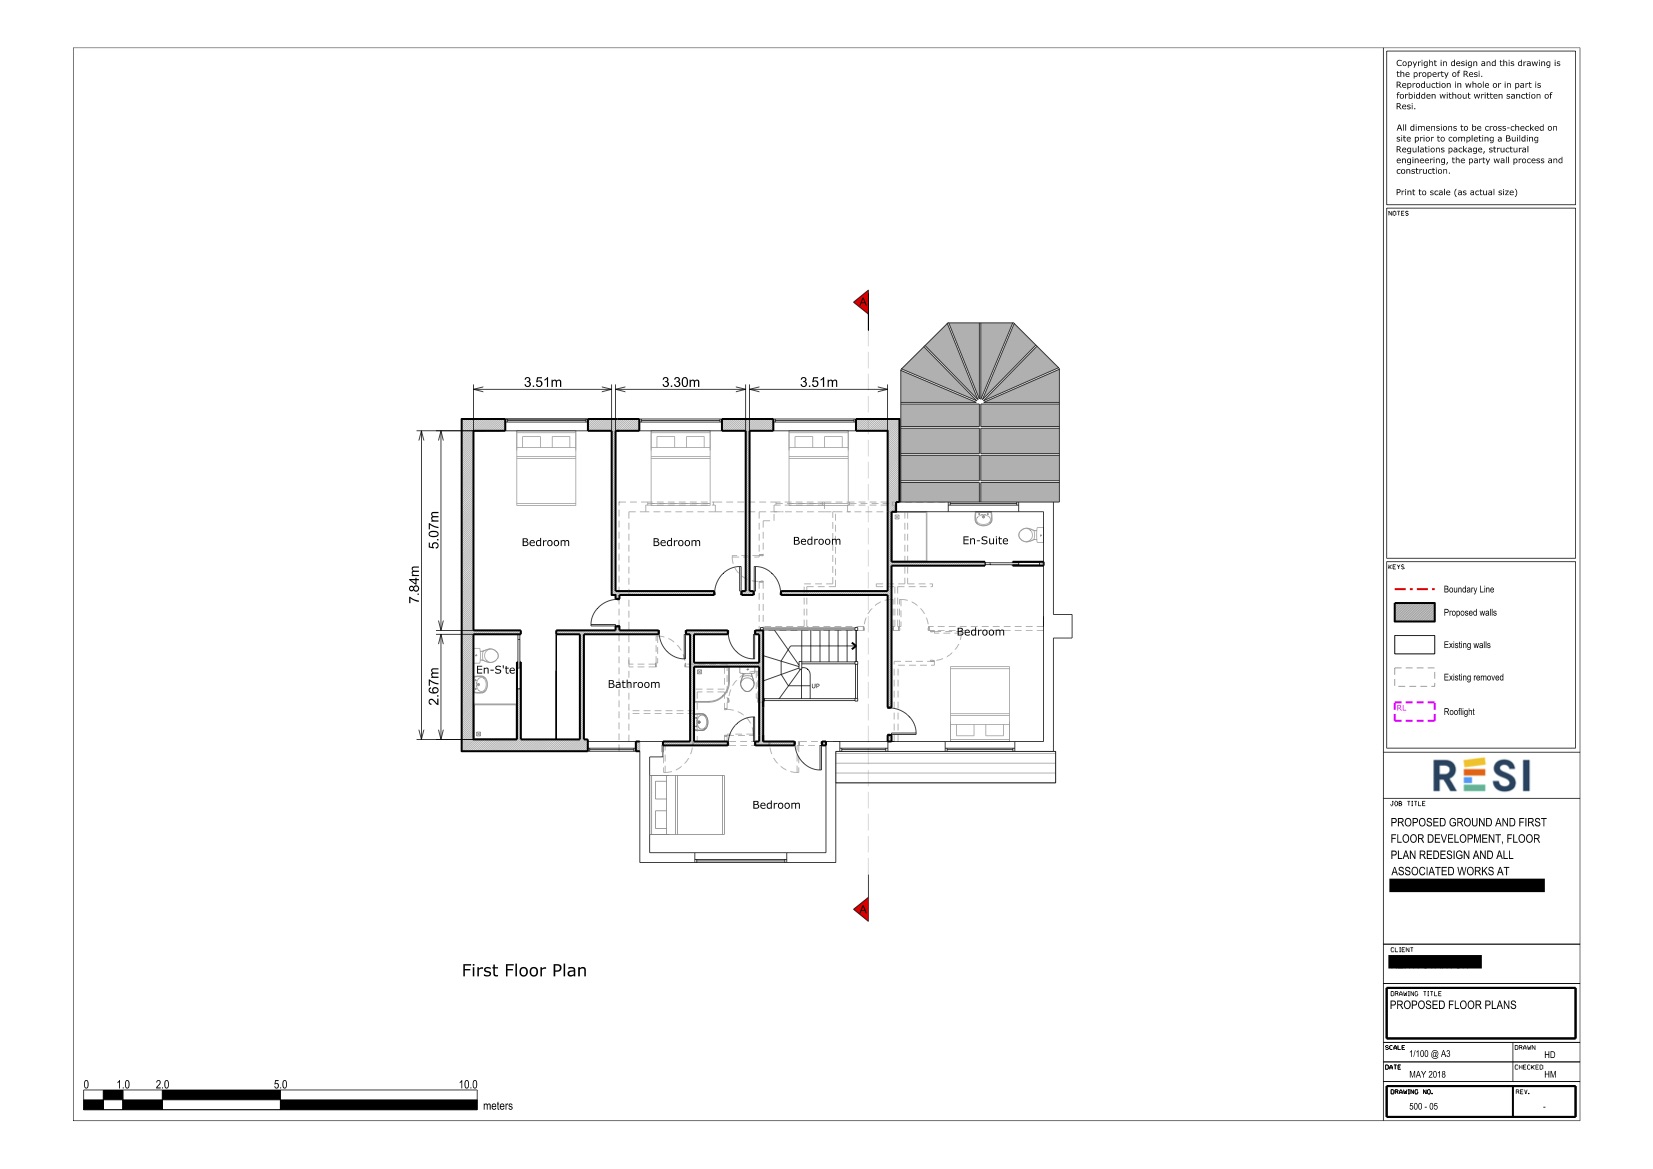 2733 - Keith Stanton - First Floor Plans